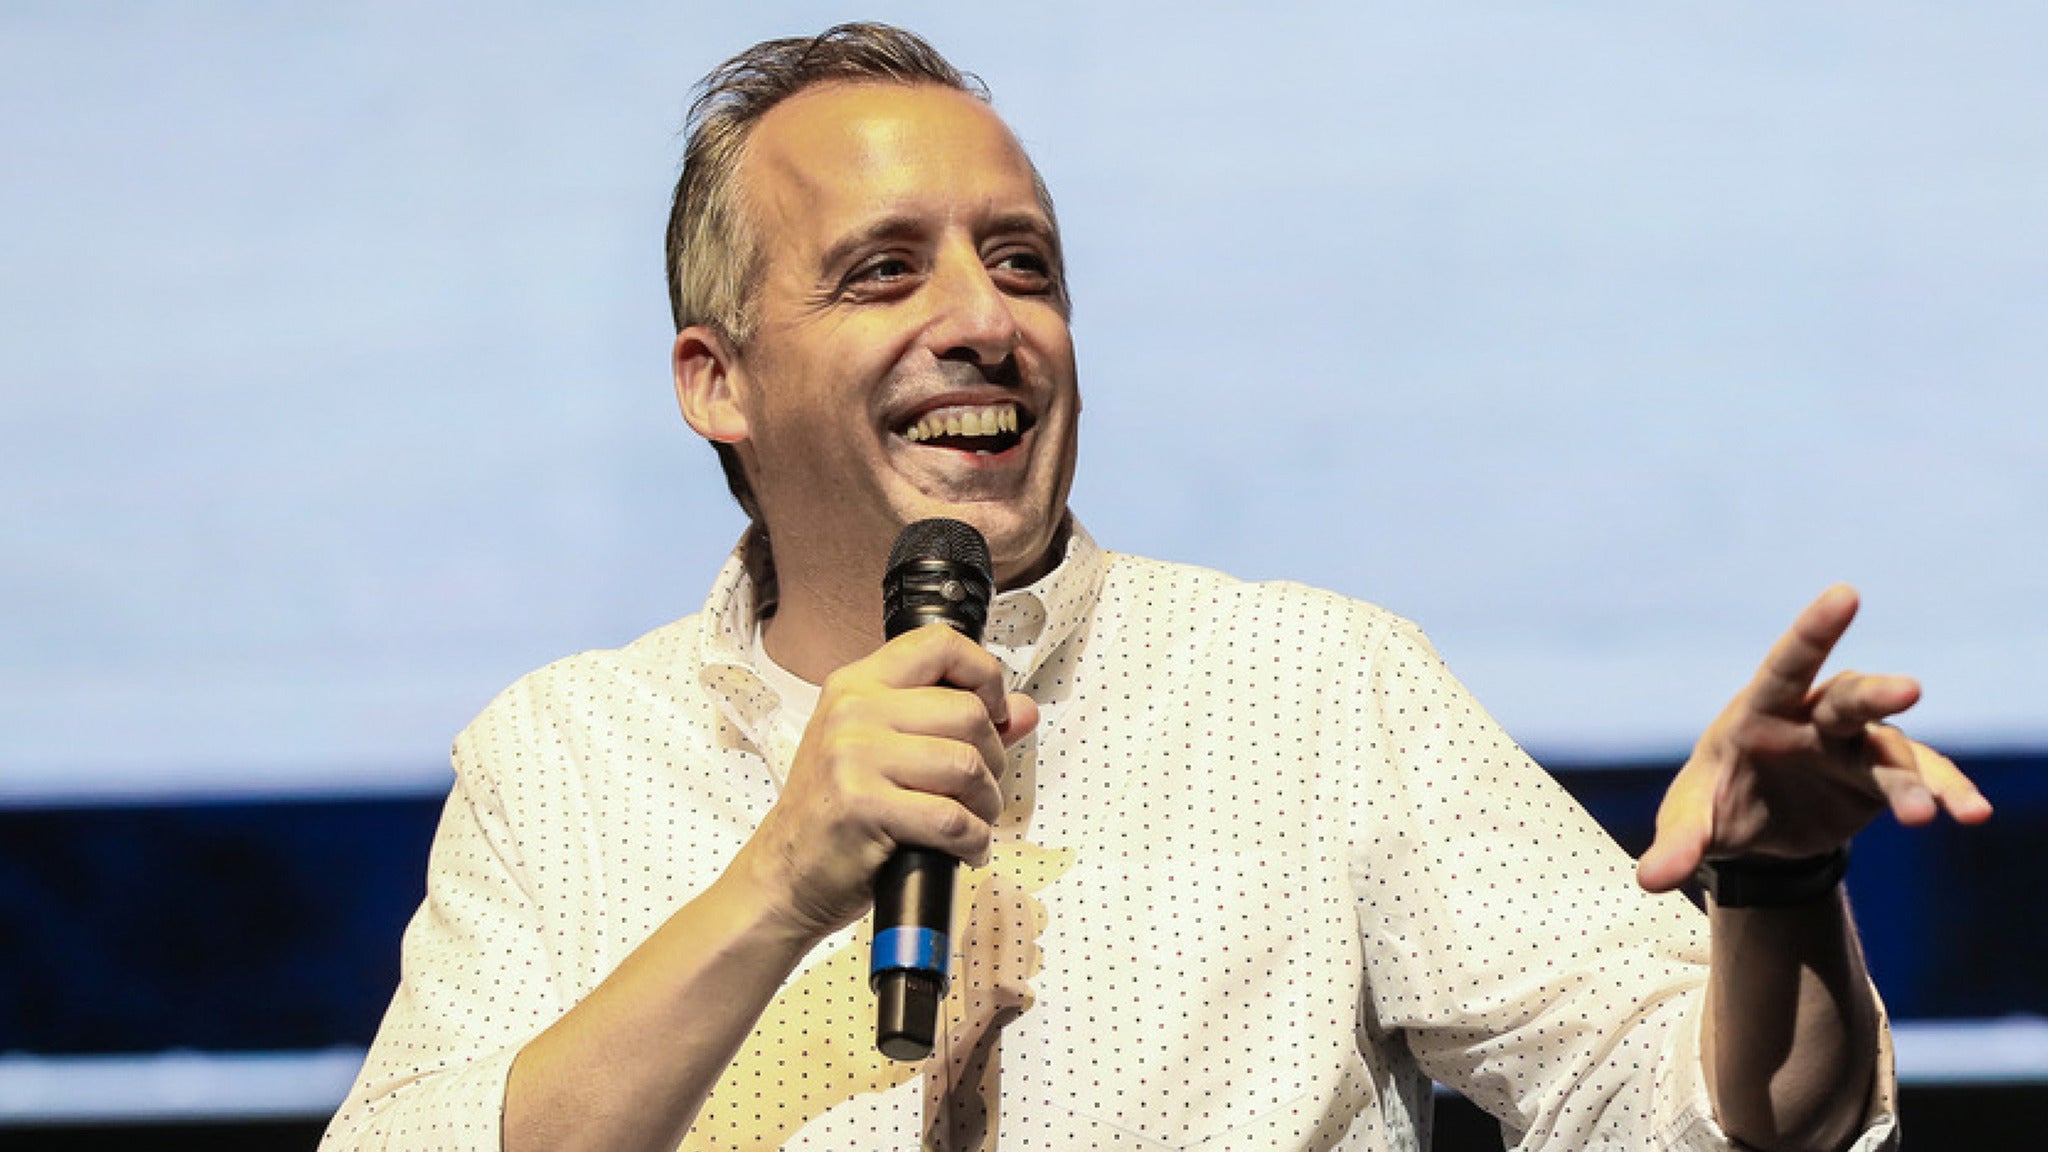 Joe Gatto's Night Of Comedy at The Factory